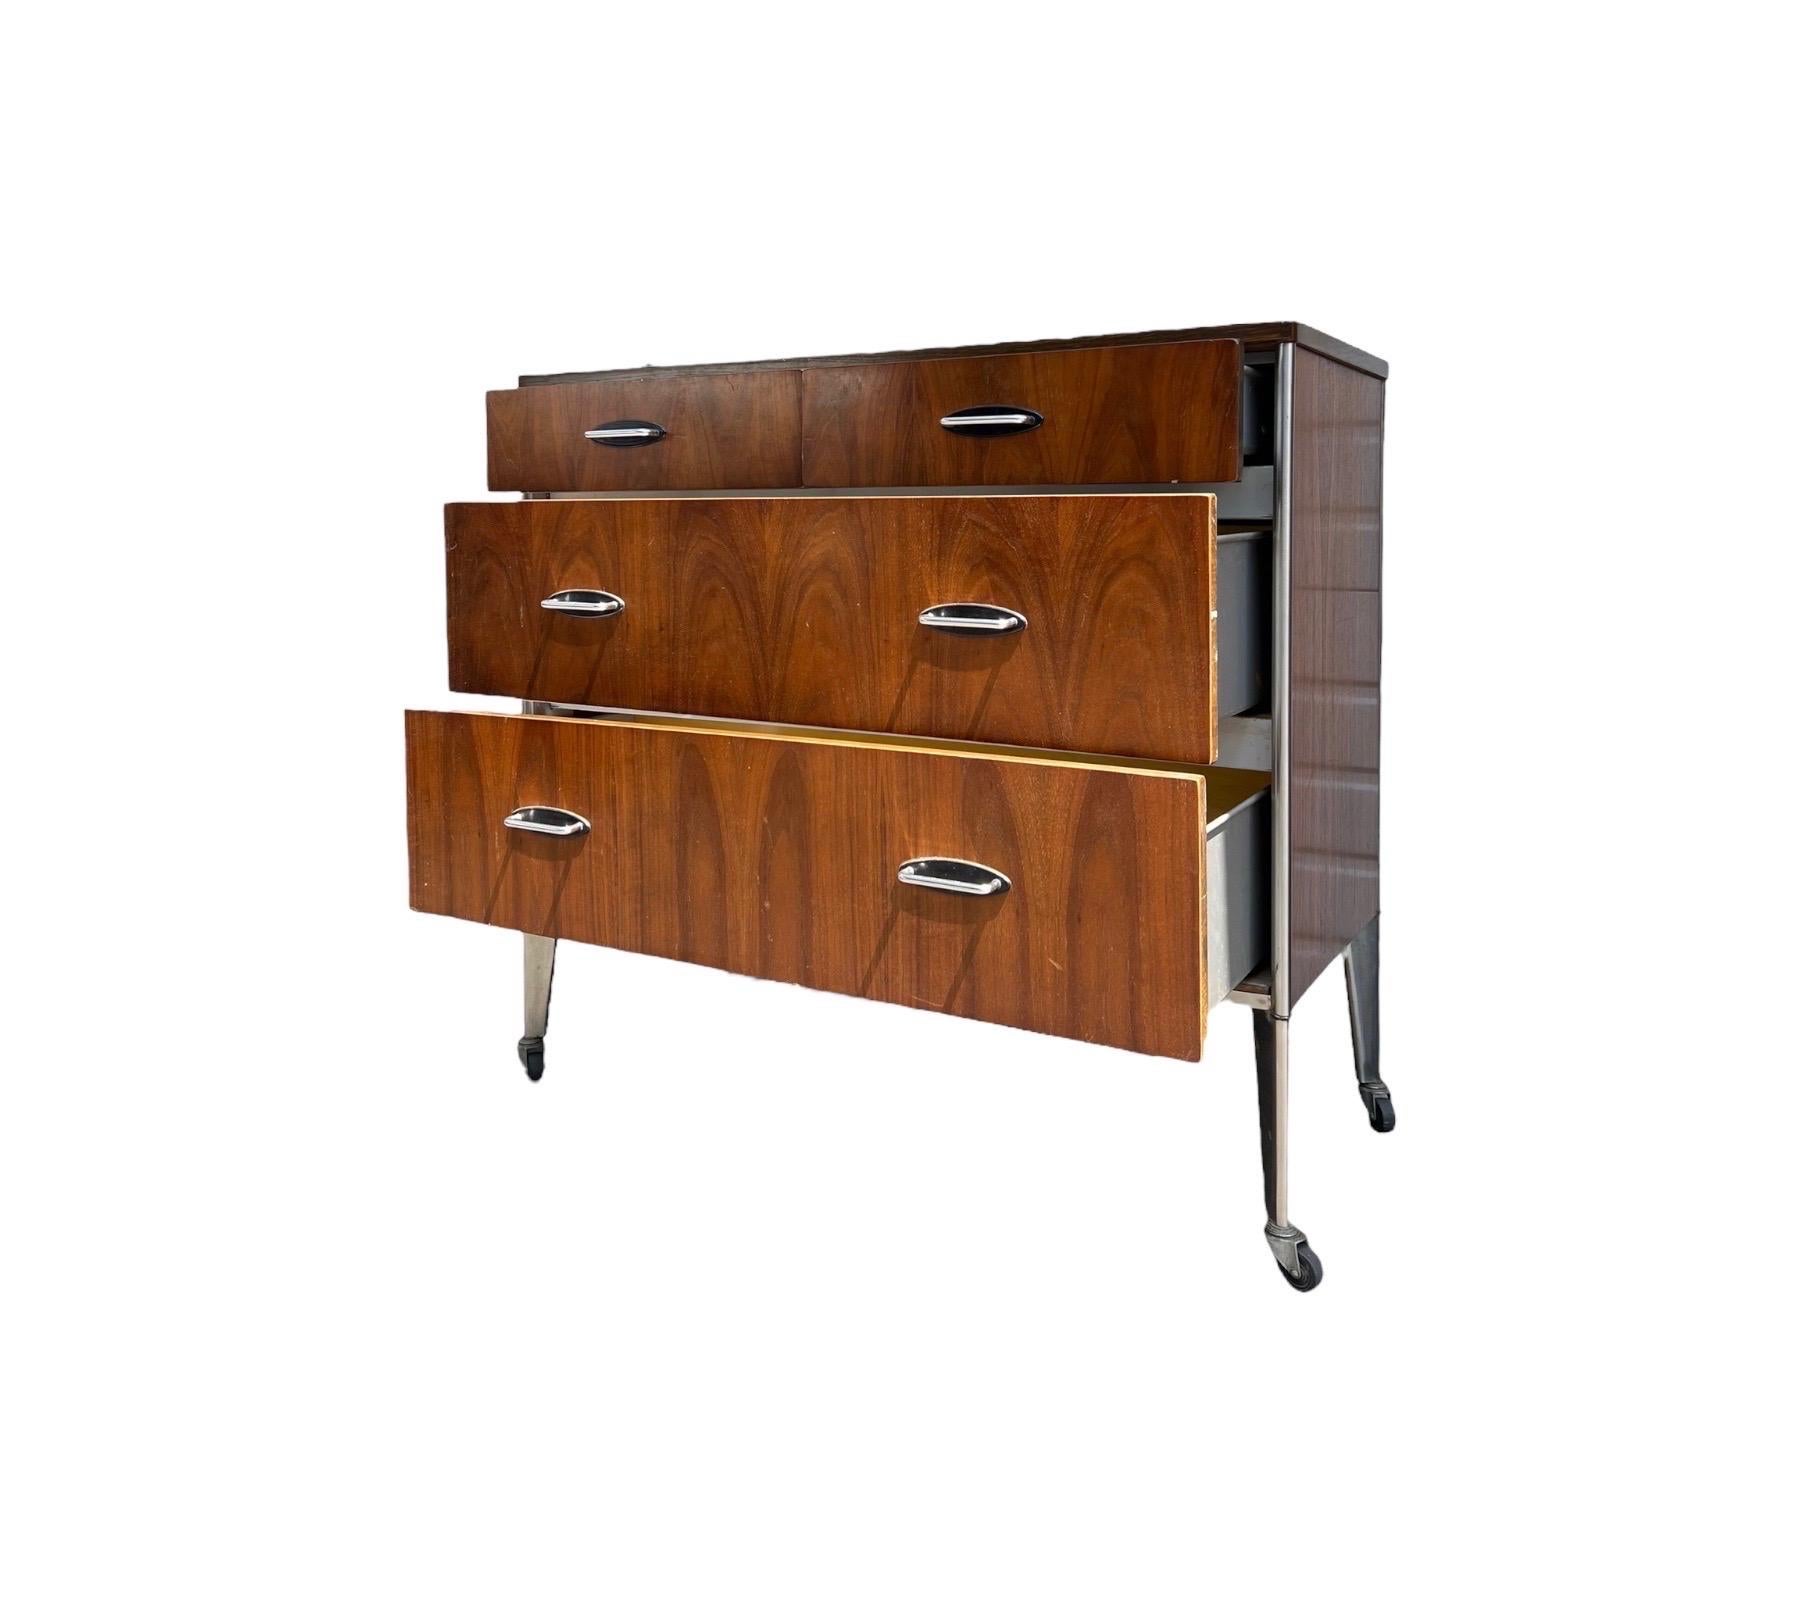 Wood Vintage Mid Century Modern Dresser By Raymond Loewy For Hill Rom Walnut Casters  For Sale